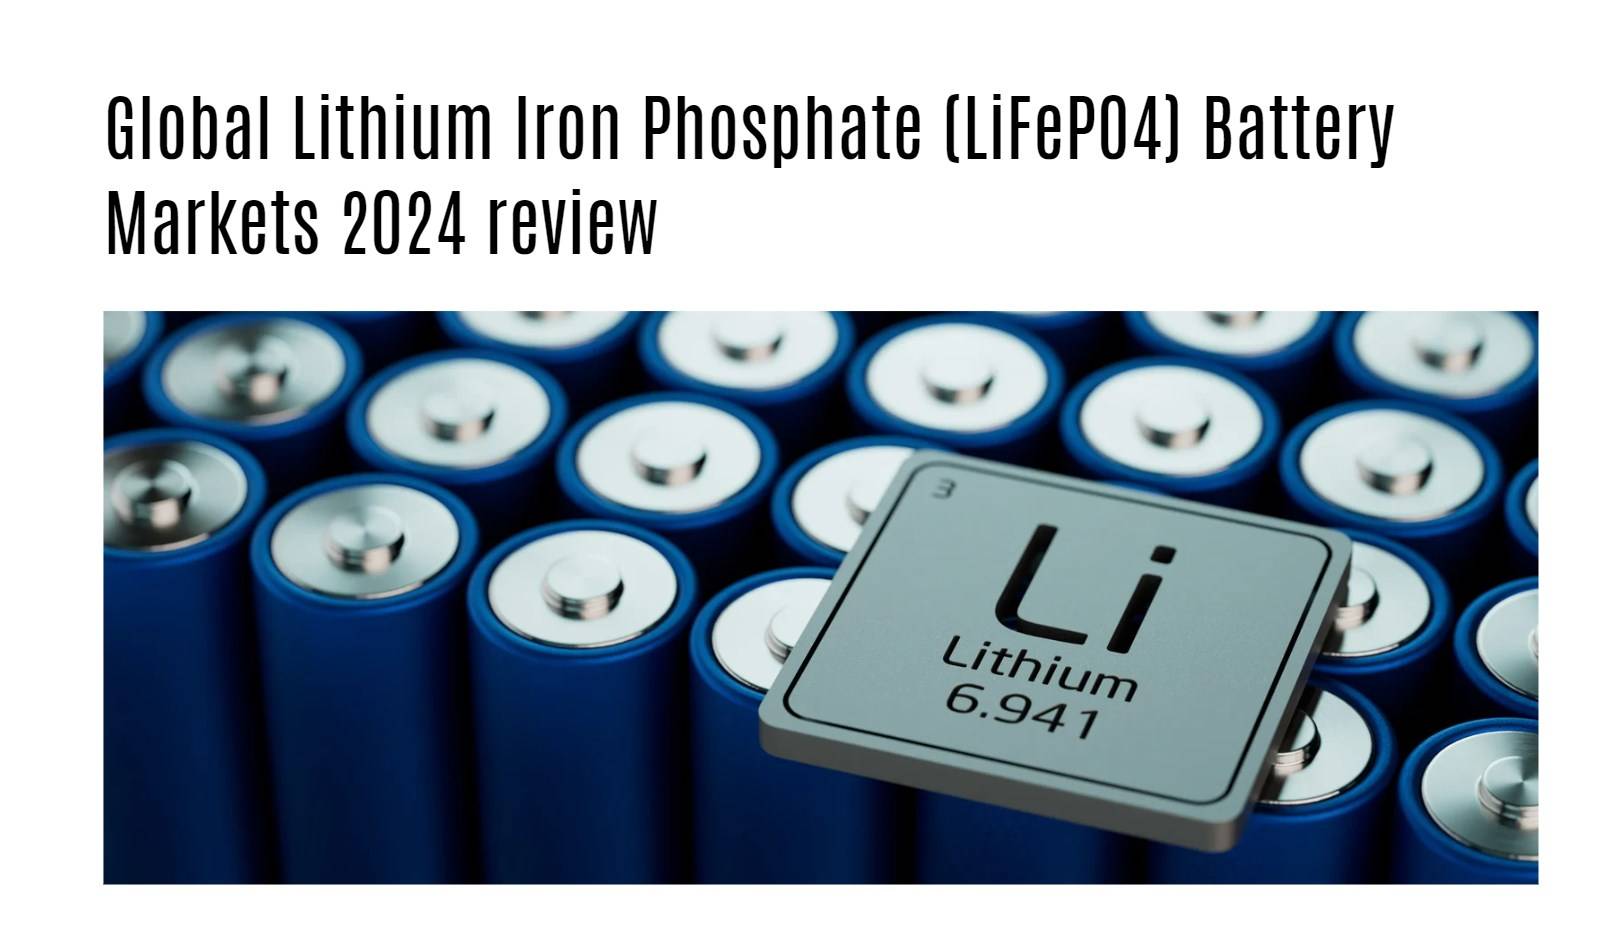 Global Lithium Iron Phosphate (LiFePO4) Battery Markets 2024 review